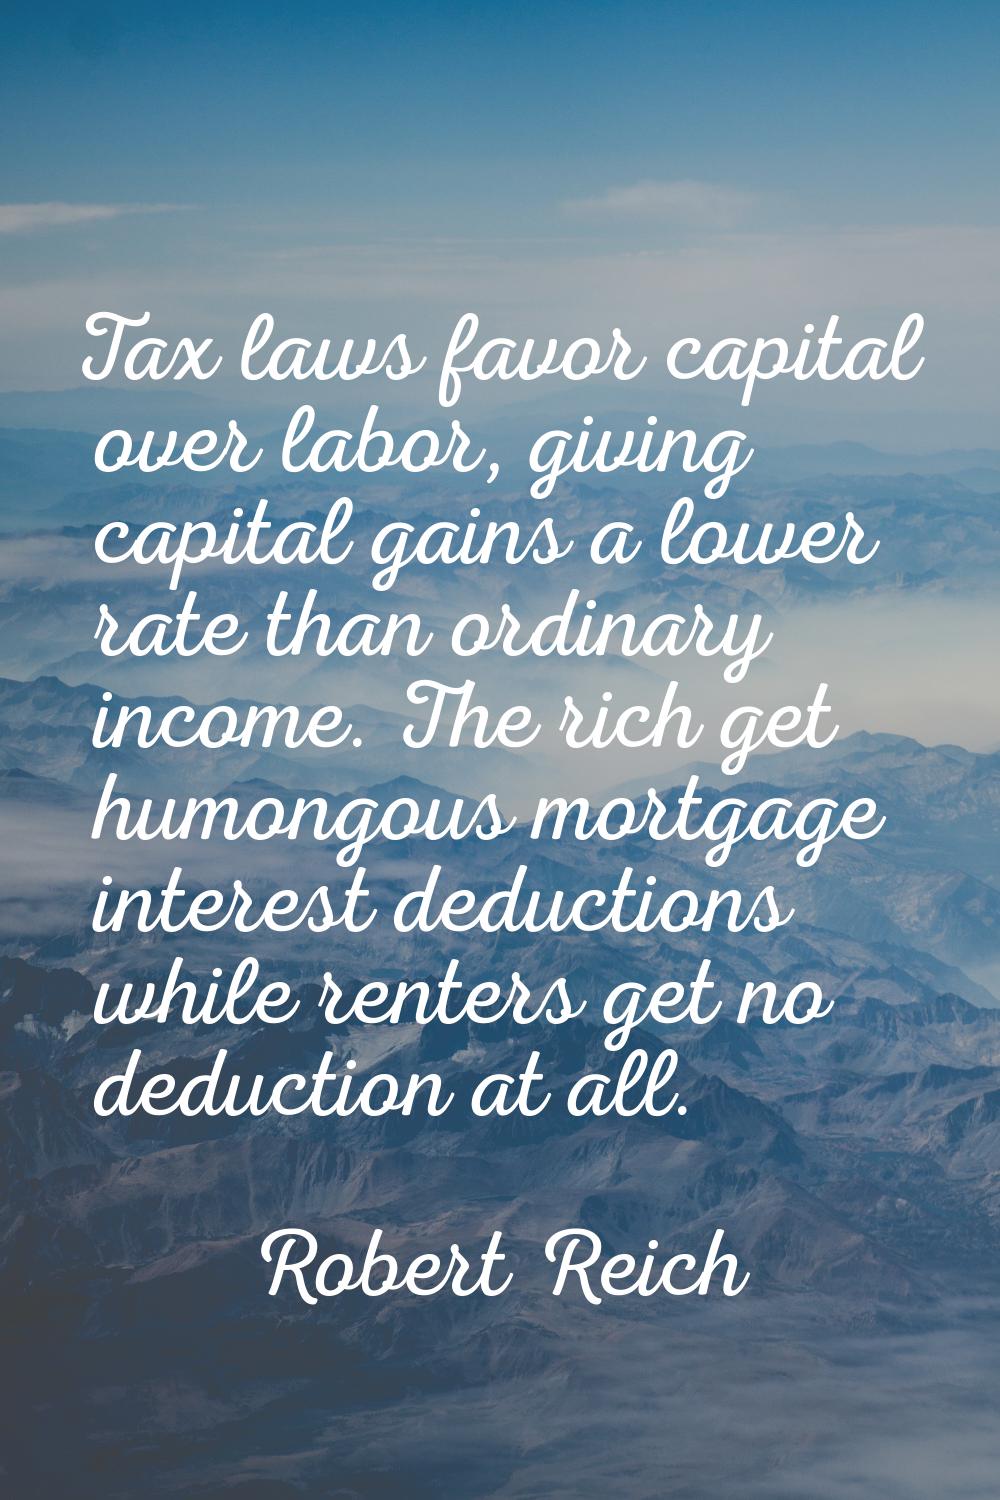 Tax laws favor capital over labor, giving capital gains a lower rate than ordinary income. The rich